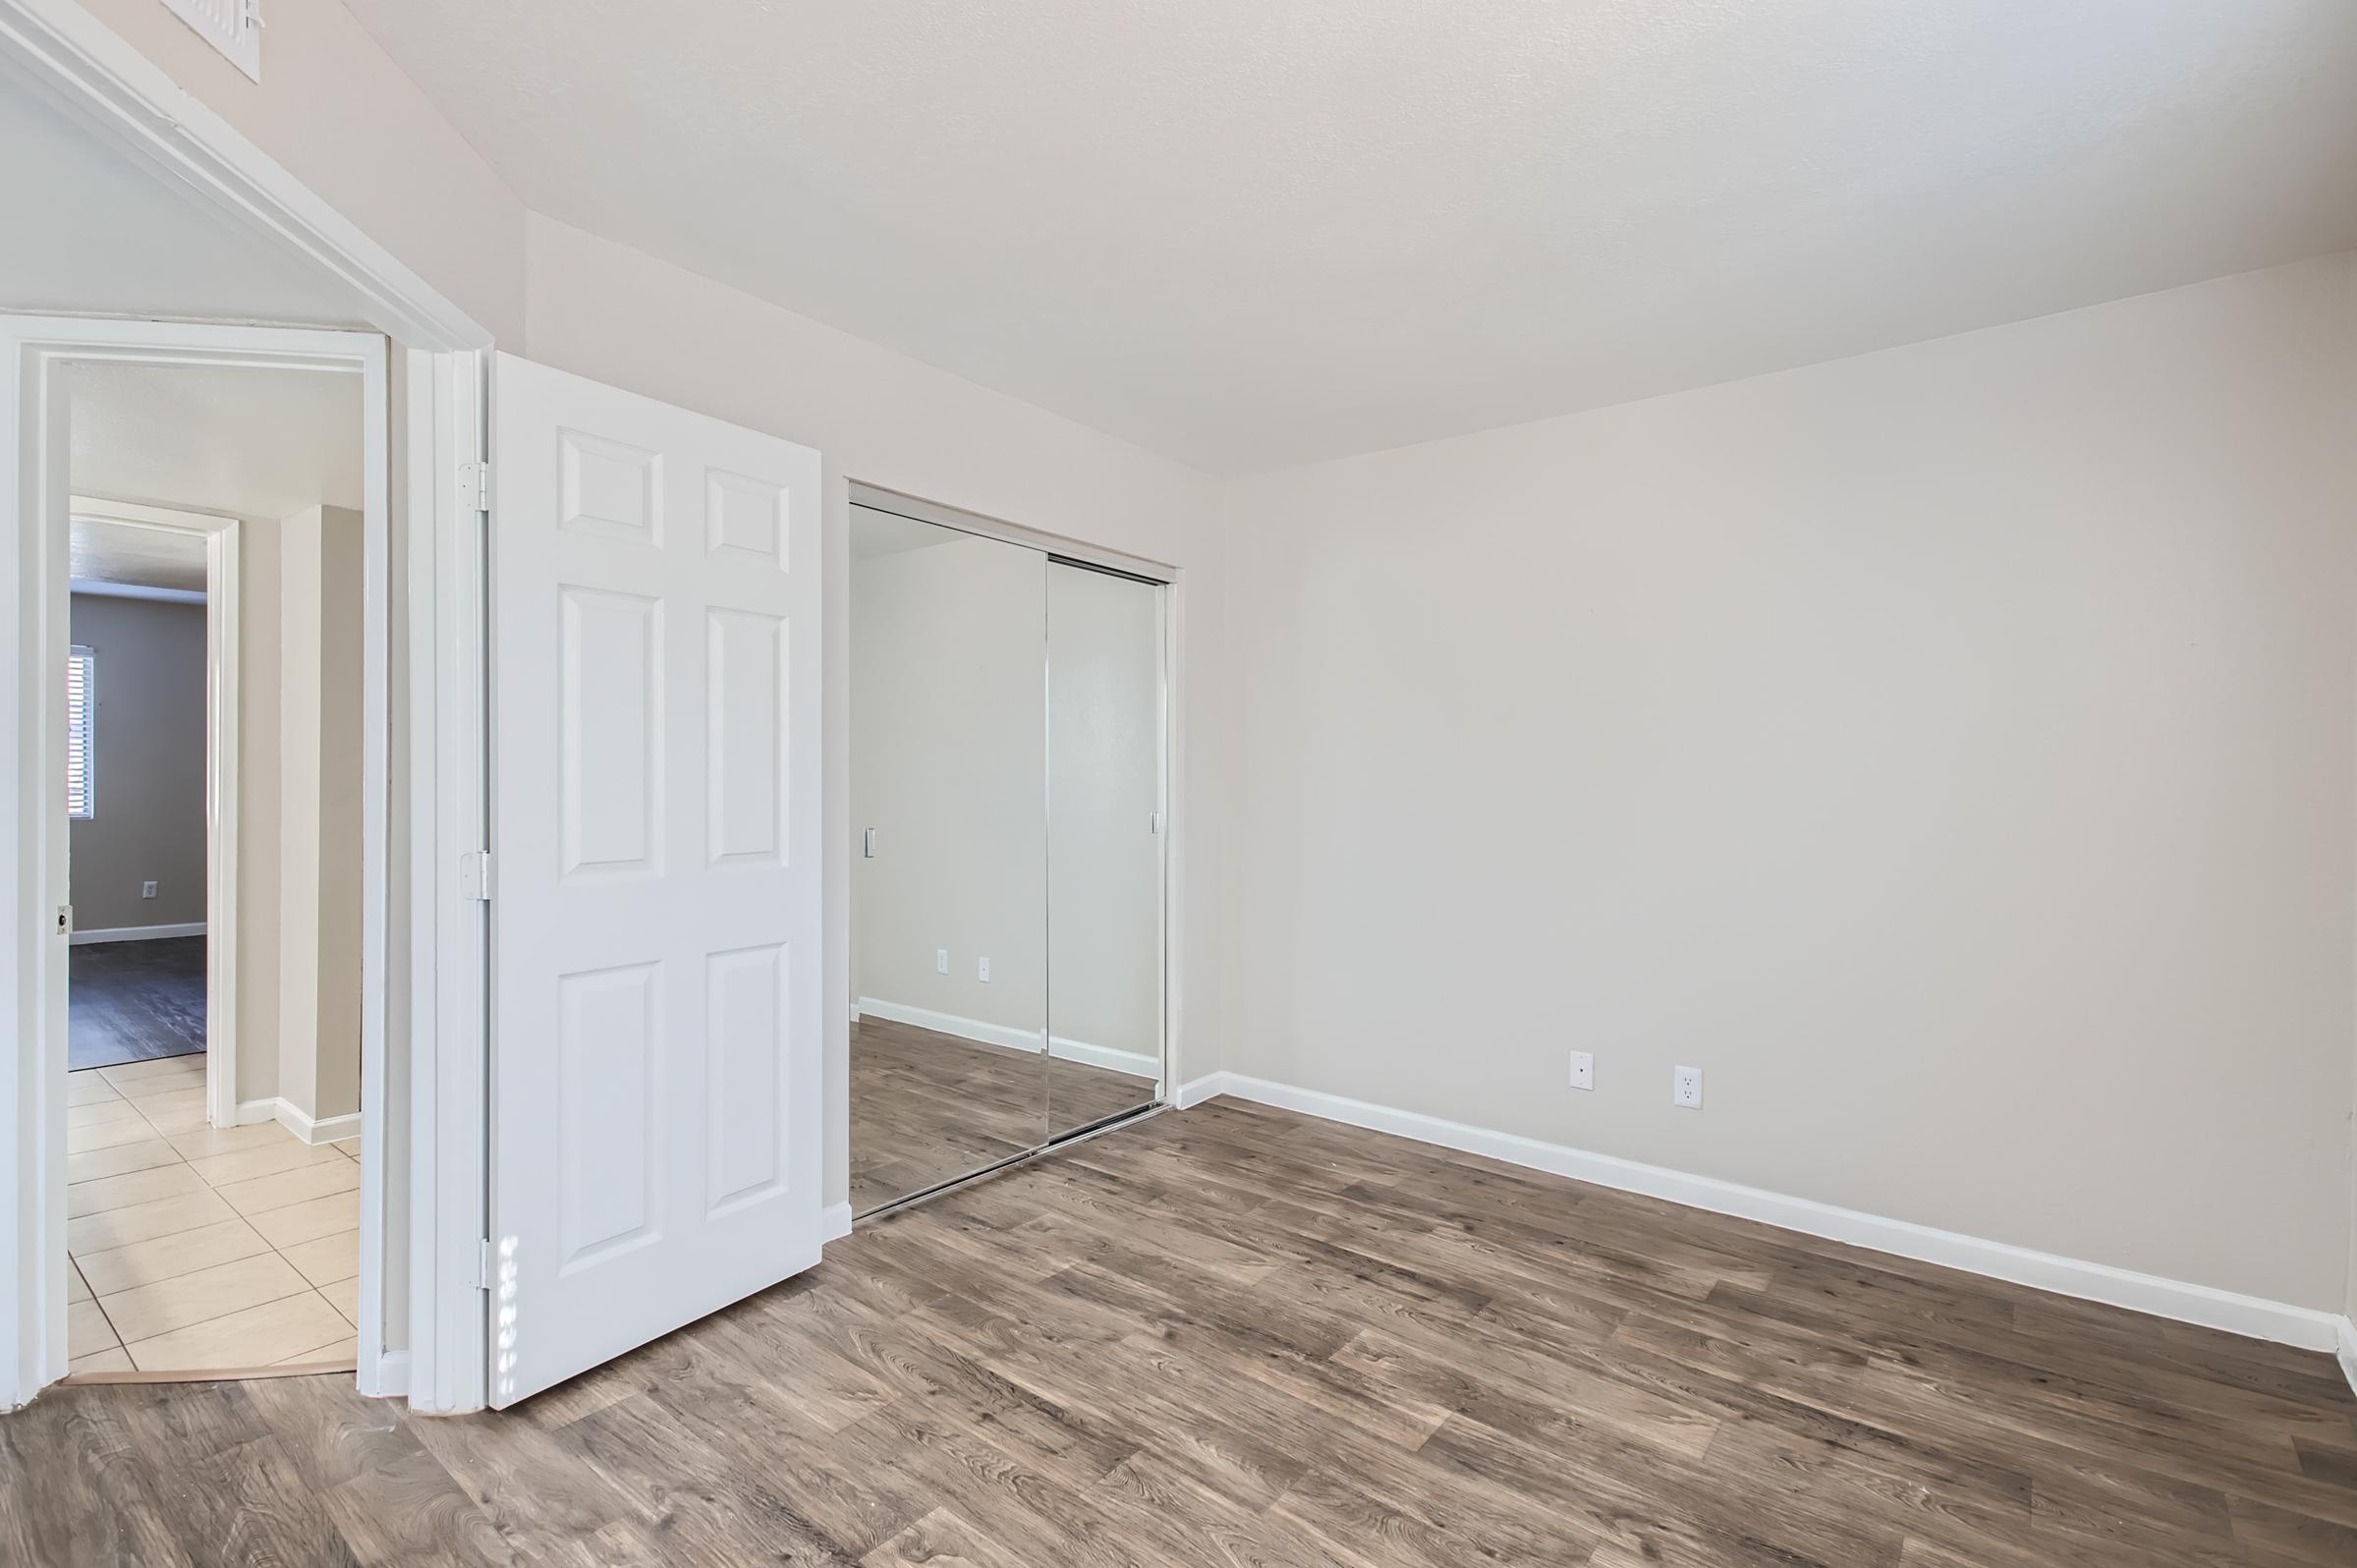 Empty Rise Desert Cove apartment bedroom with a wooden floor and door to the bathroom and mirrored closet sliding door to the left